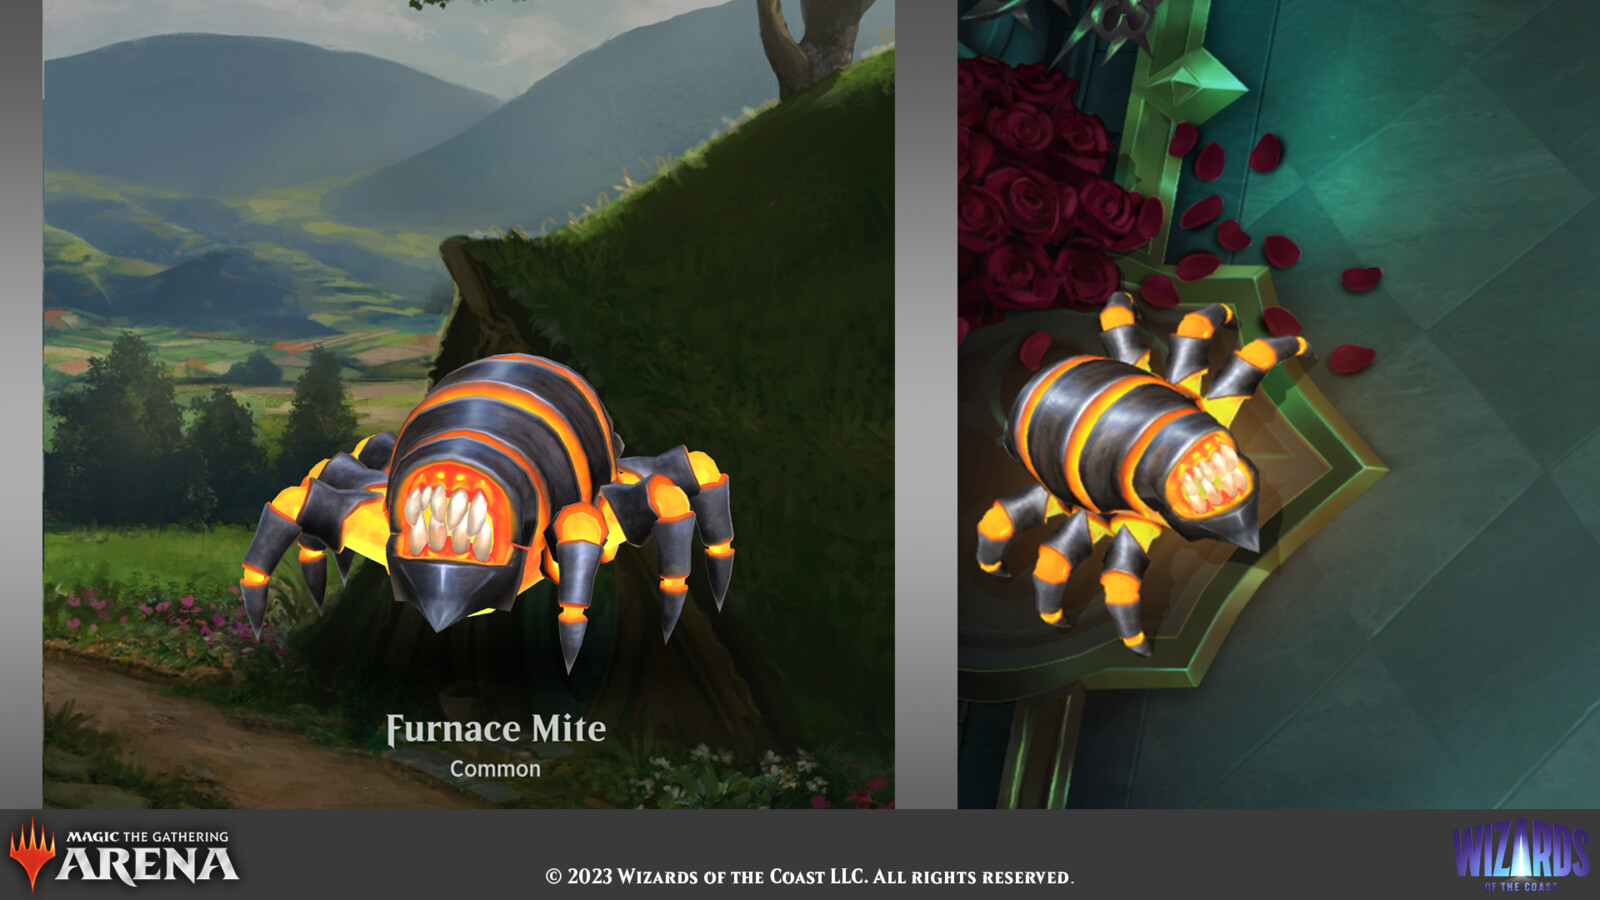 Select pet and game views for the Furnace Mite